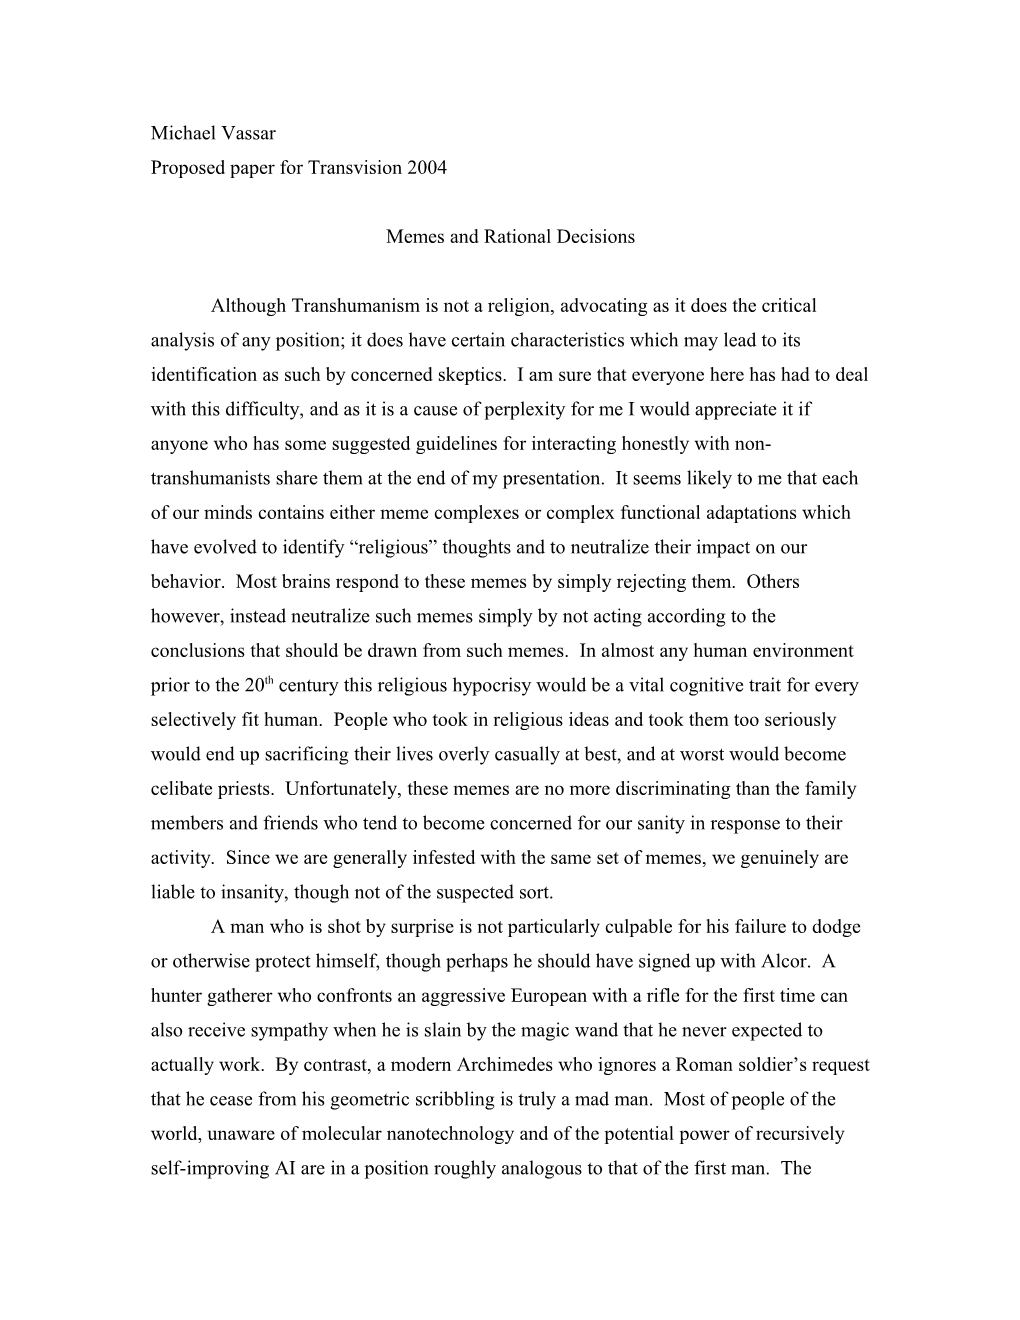 Proposed Paper for Transvision 2004